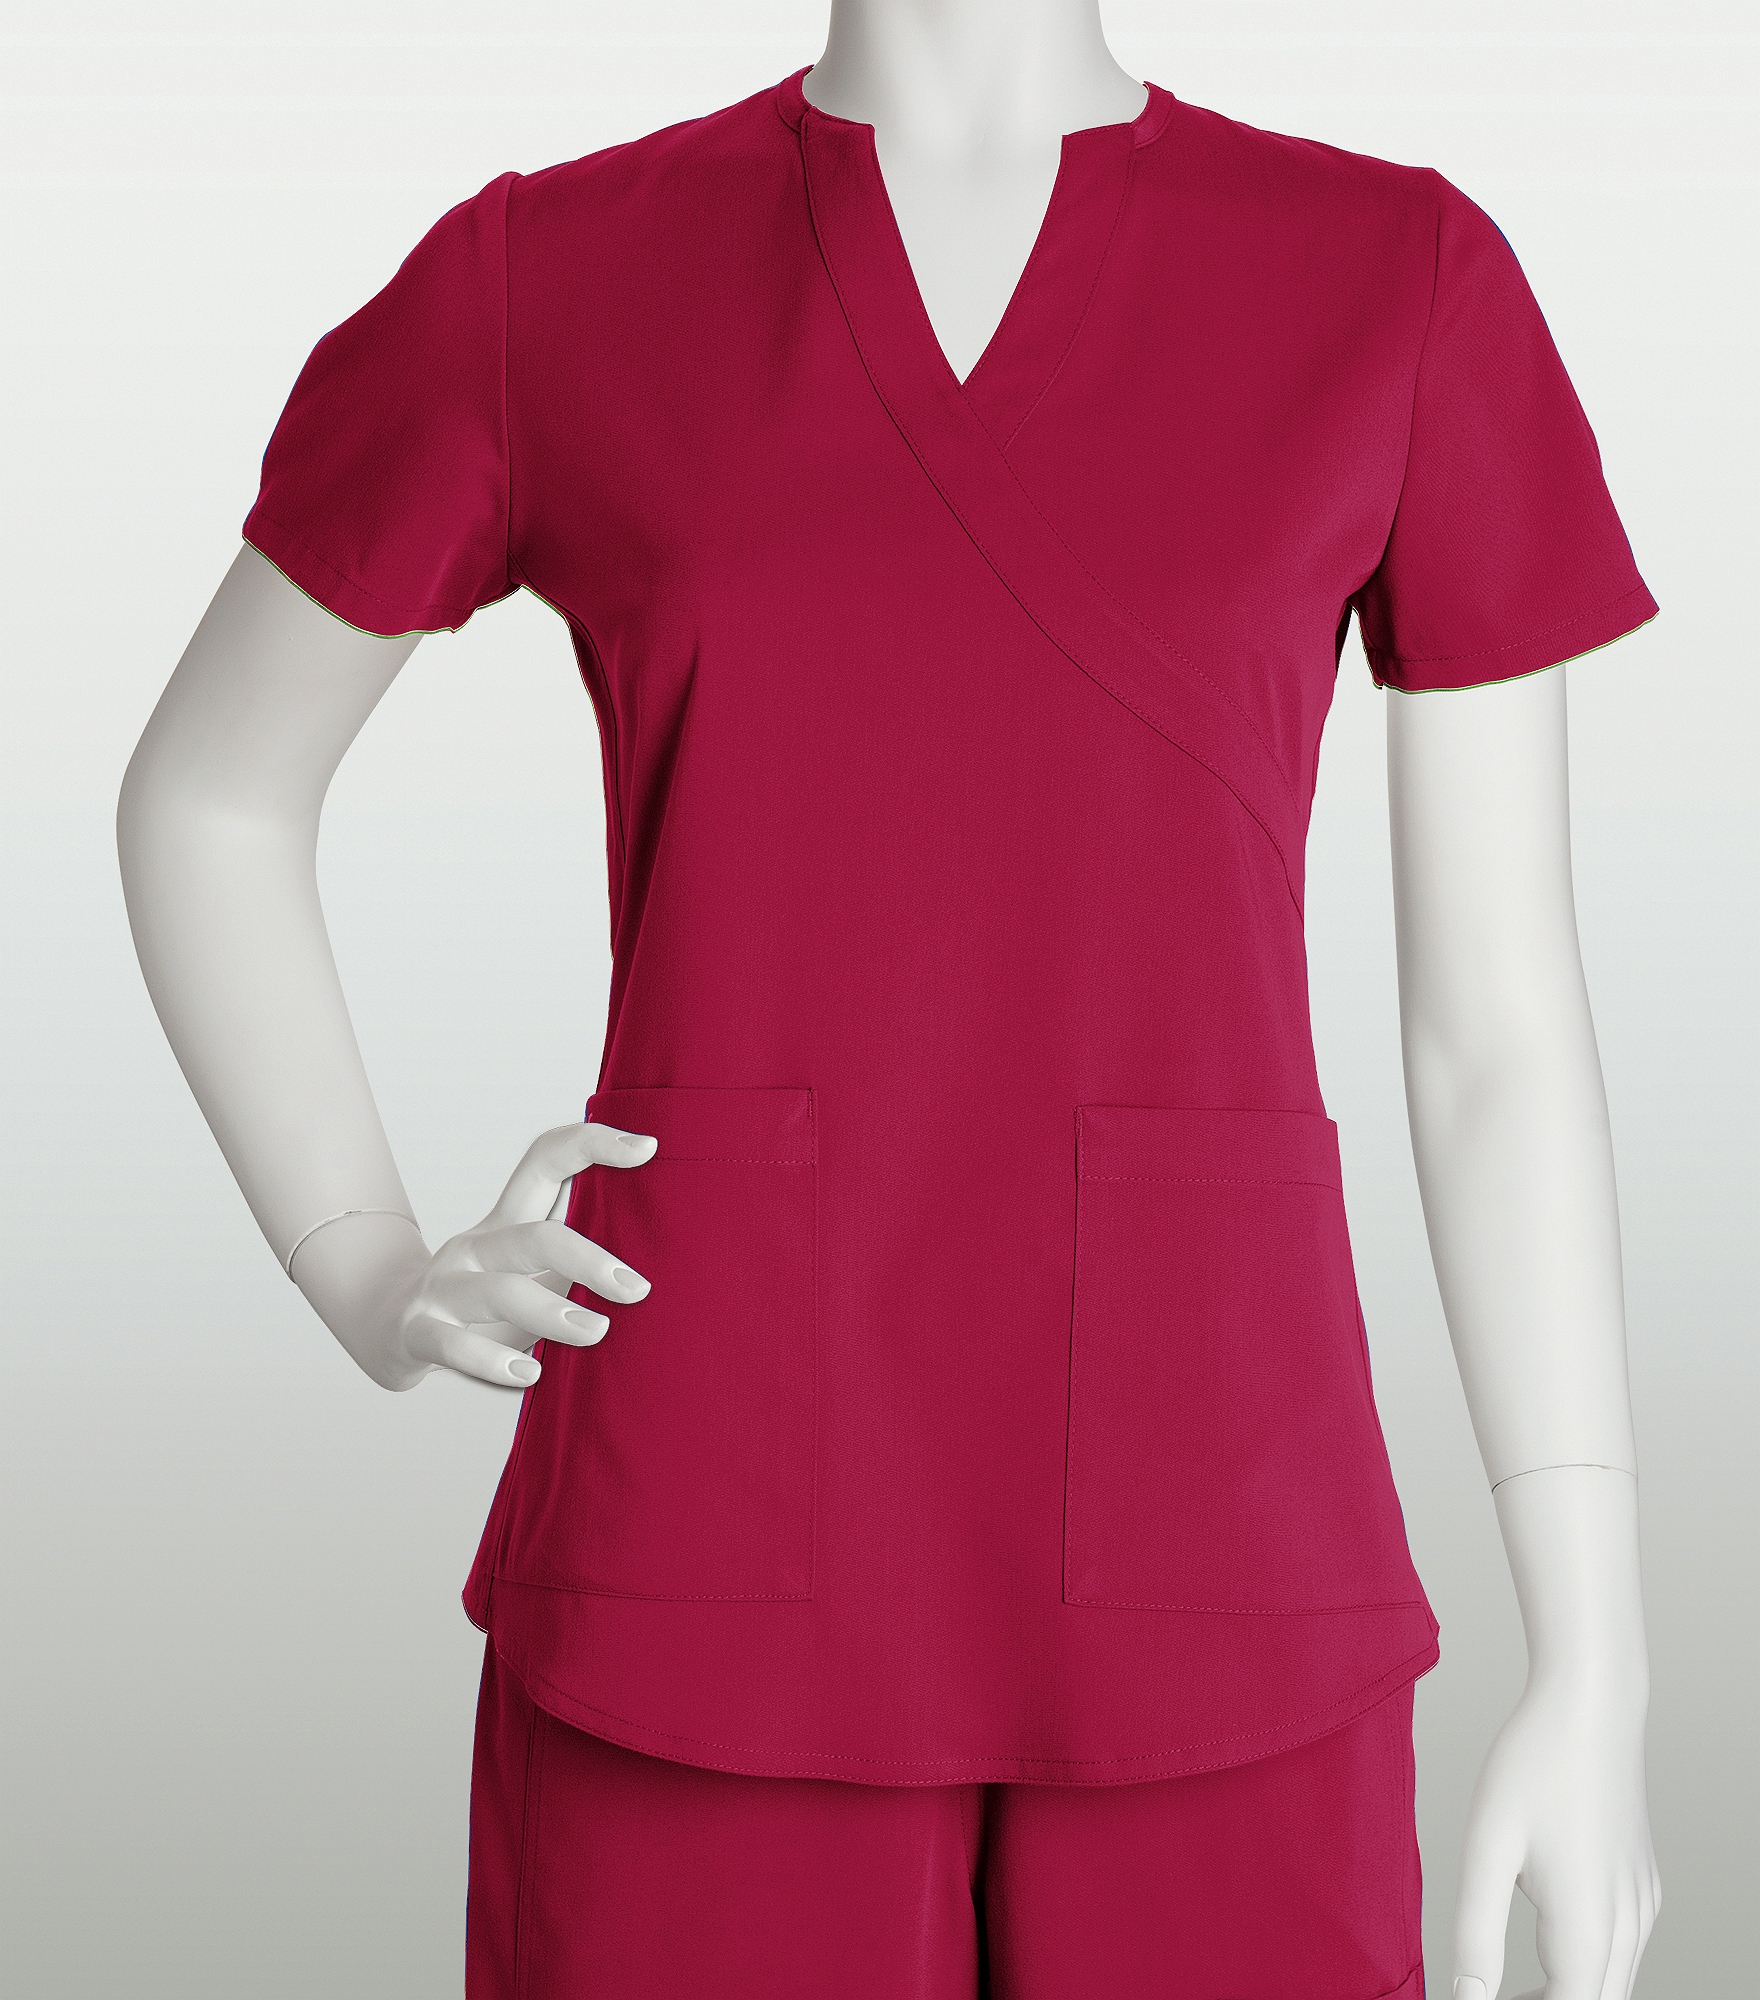 NRG by Barco Women's Mock Wrap Solid Scrub Top With Side Panels-3119